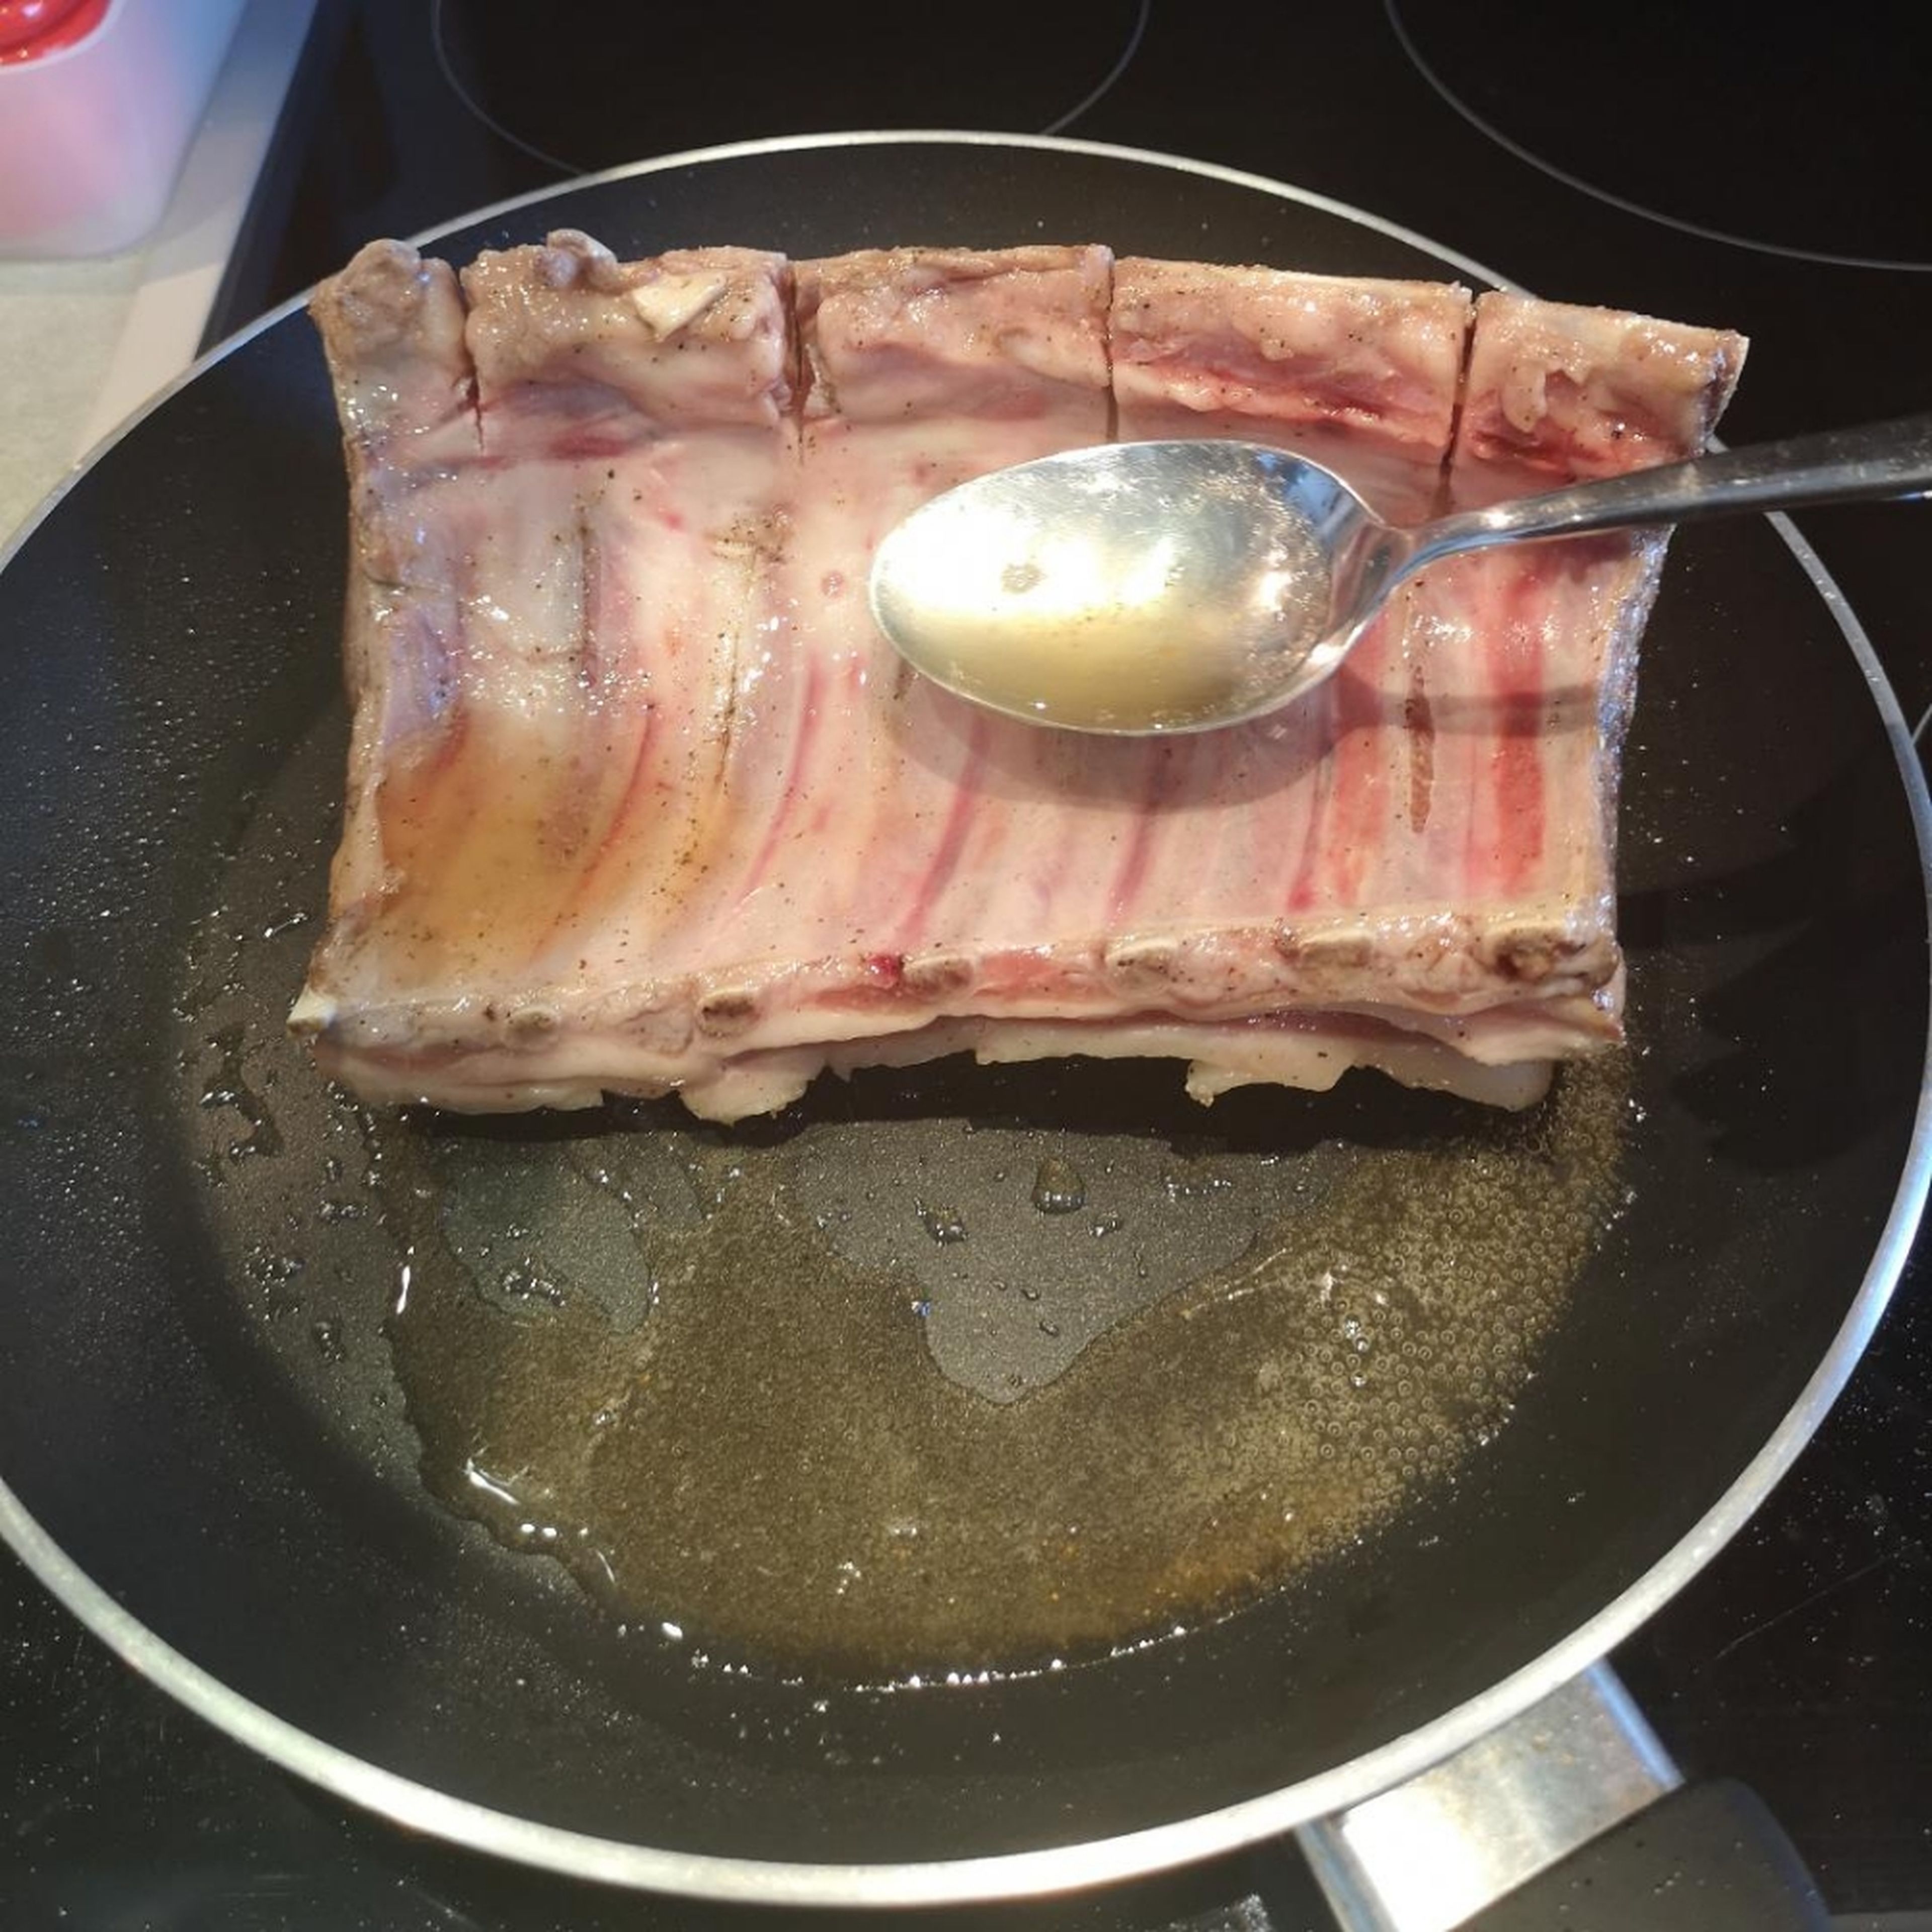 the bone part is the hardest to sear as the angle makes it impossible to get it in contact with the pan. once you've seared all the sides, grab a spoon, tilt your pan and spoon the hot fat onto the lamb, soon you will notice it getting darker and darker!